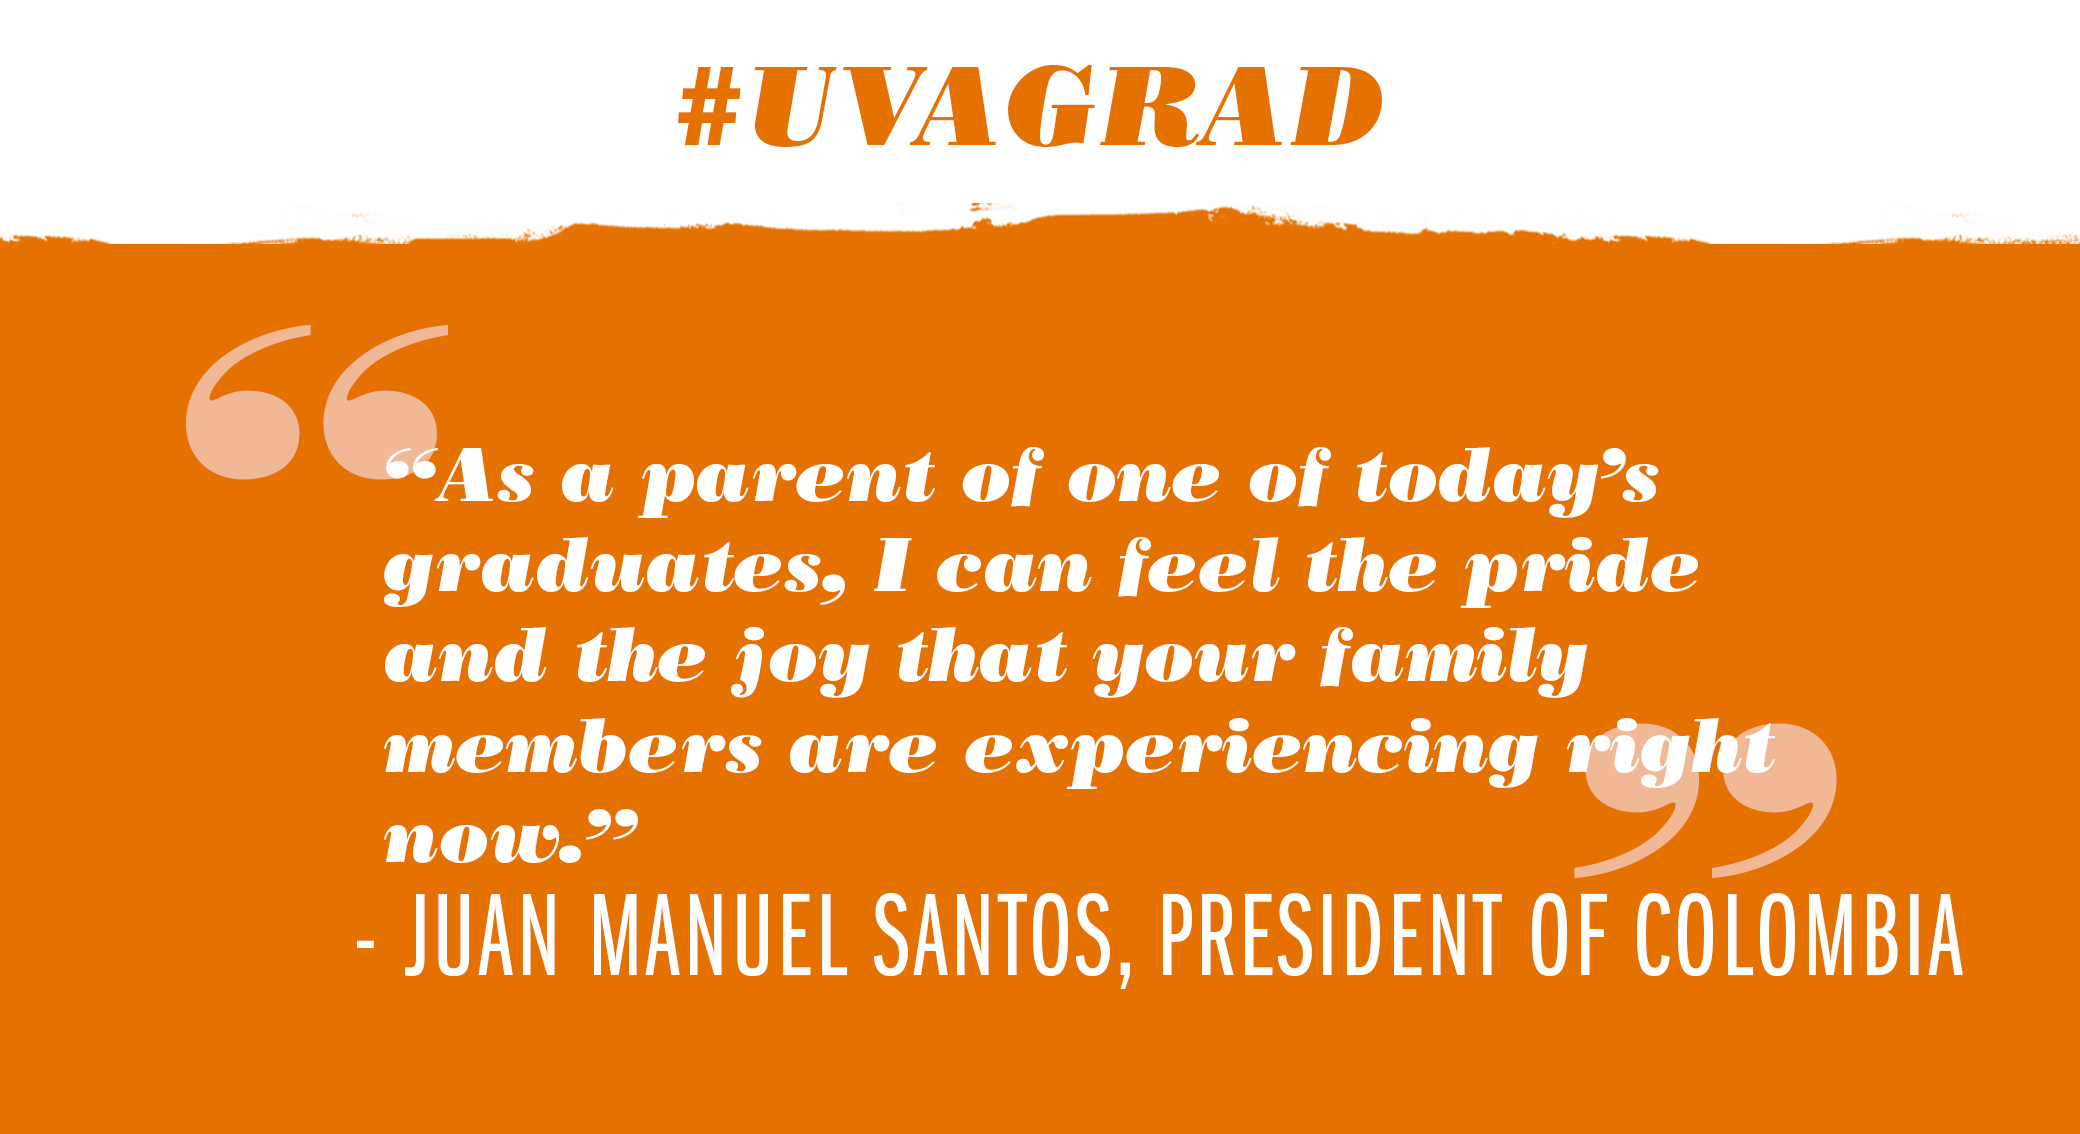 Text reads: #UVAGrad. As a parent of one of today's graduates, I can feel the pride and the joy that your family members are experiencing right now. - Juan Manuel Santos, President of Columbia